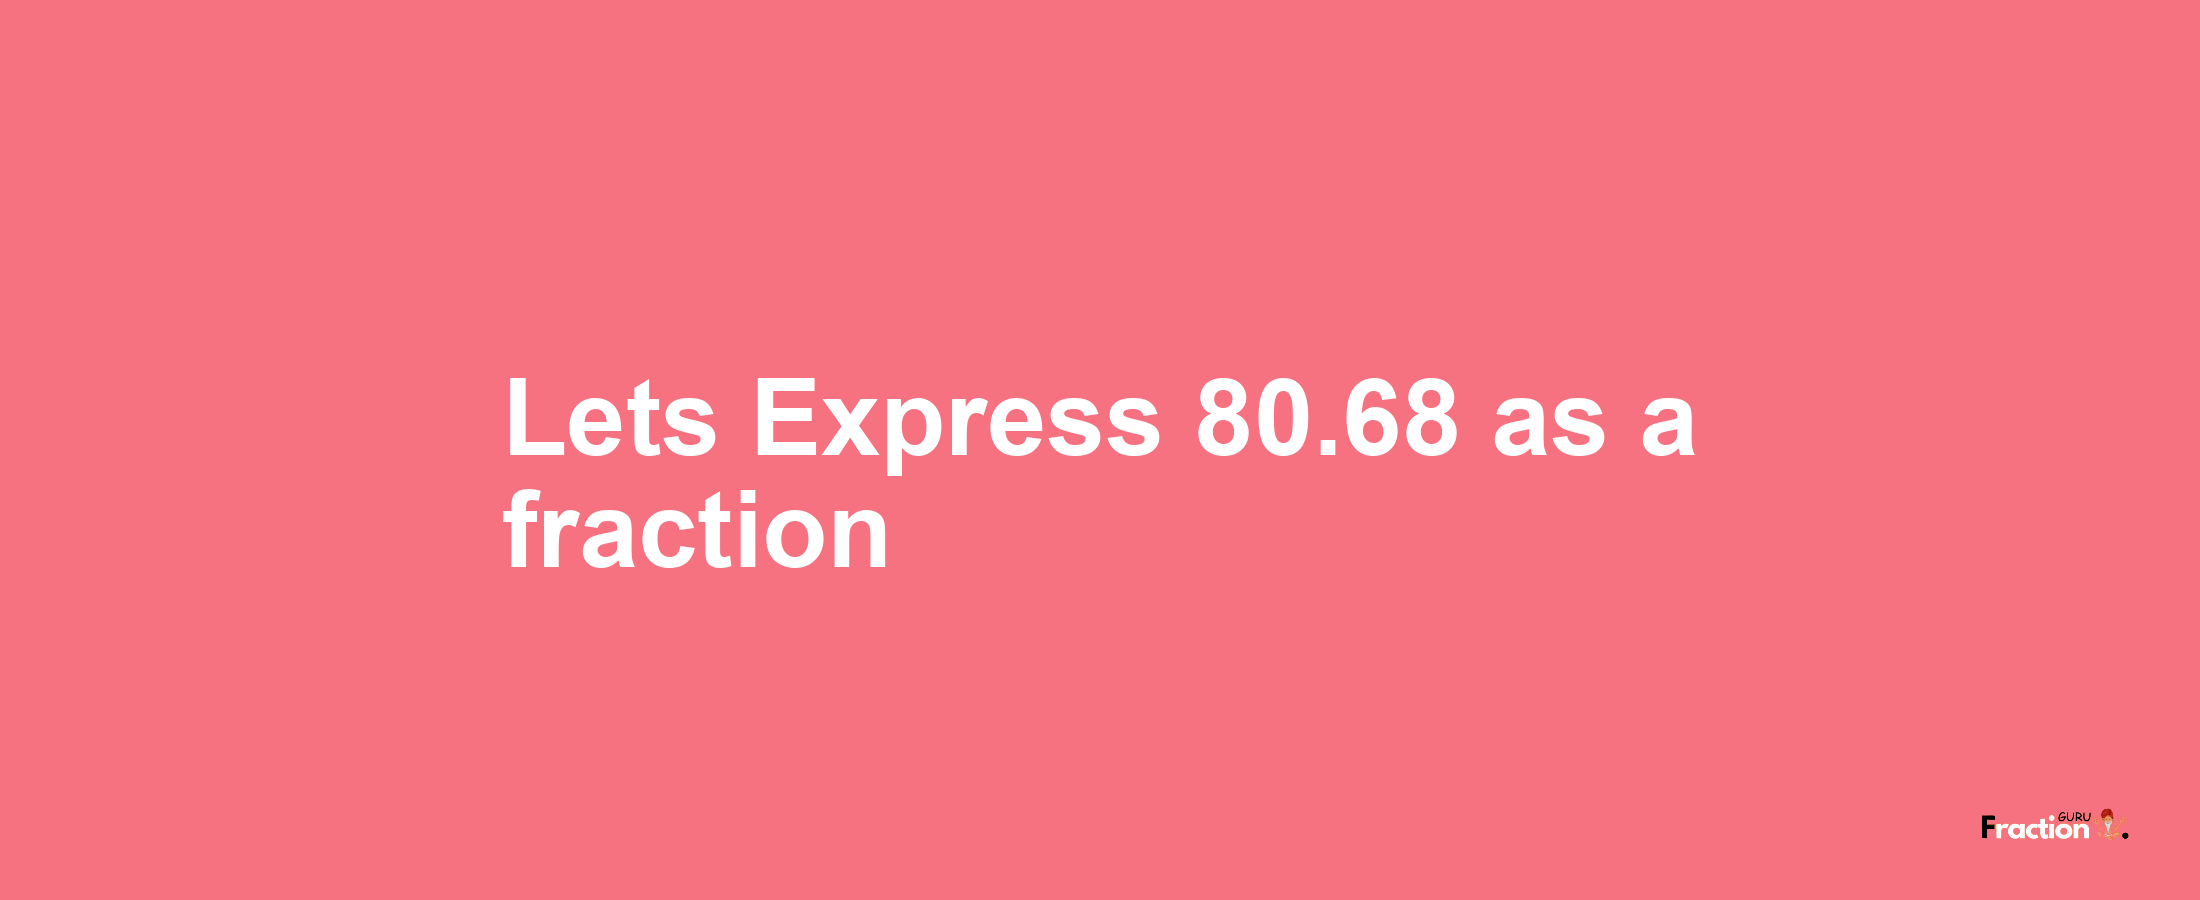 Lets Express 80.68 as afraction